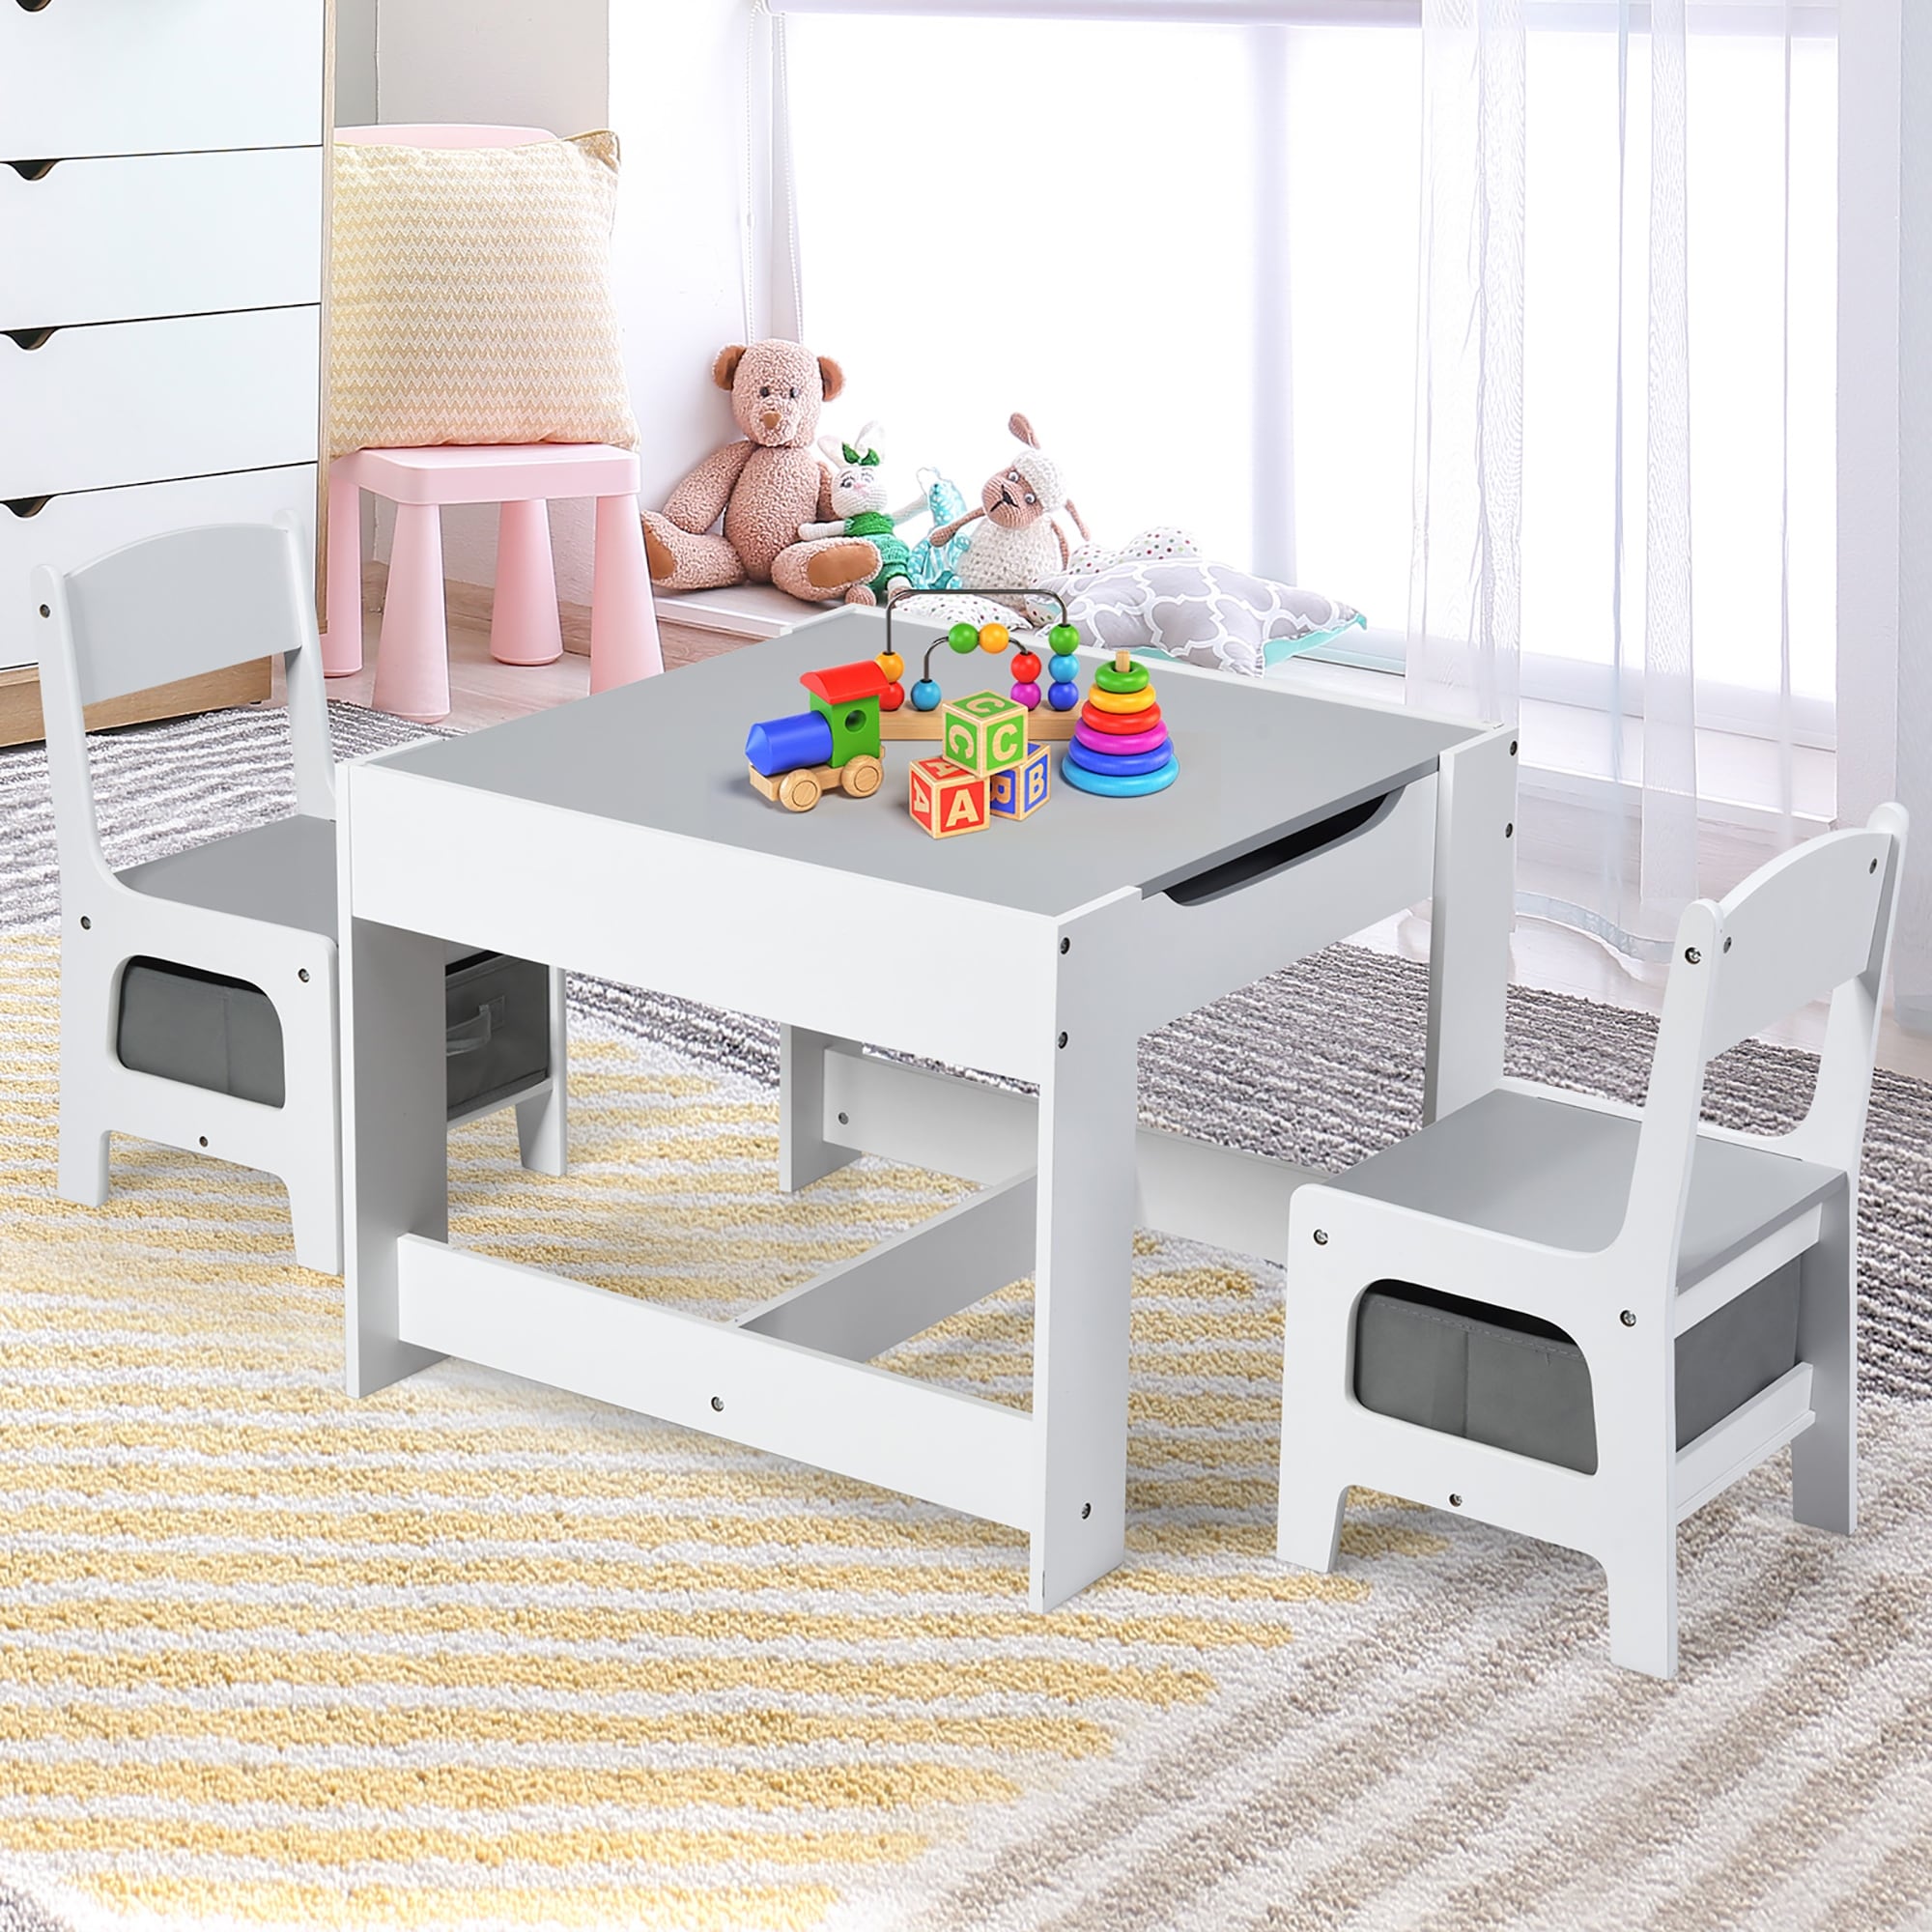 https://ak1.ostkcdn.com/images/products/is/images/direct/628b6e86f1419761172657d2b317fee9d83ae878/3-in-1-Kids-Table-and-Chair-Set-Wooden-Activity-Table-with-Chairs.jpg